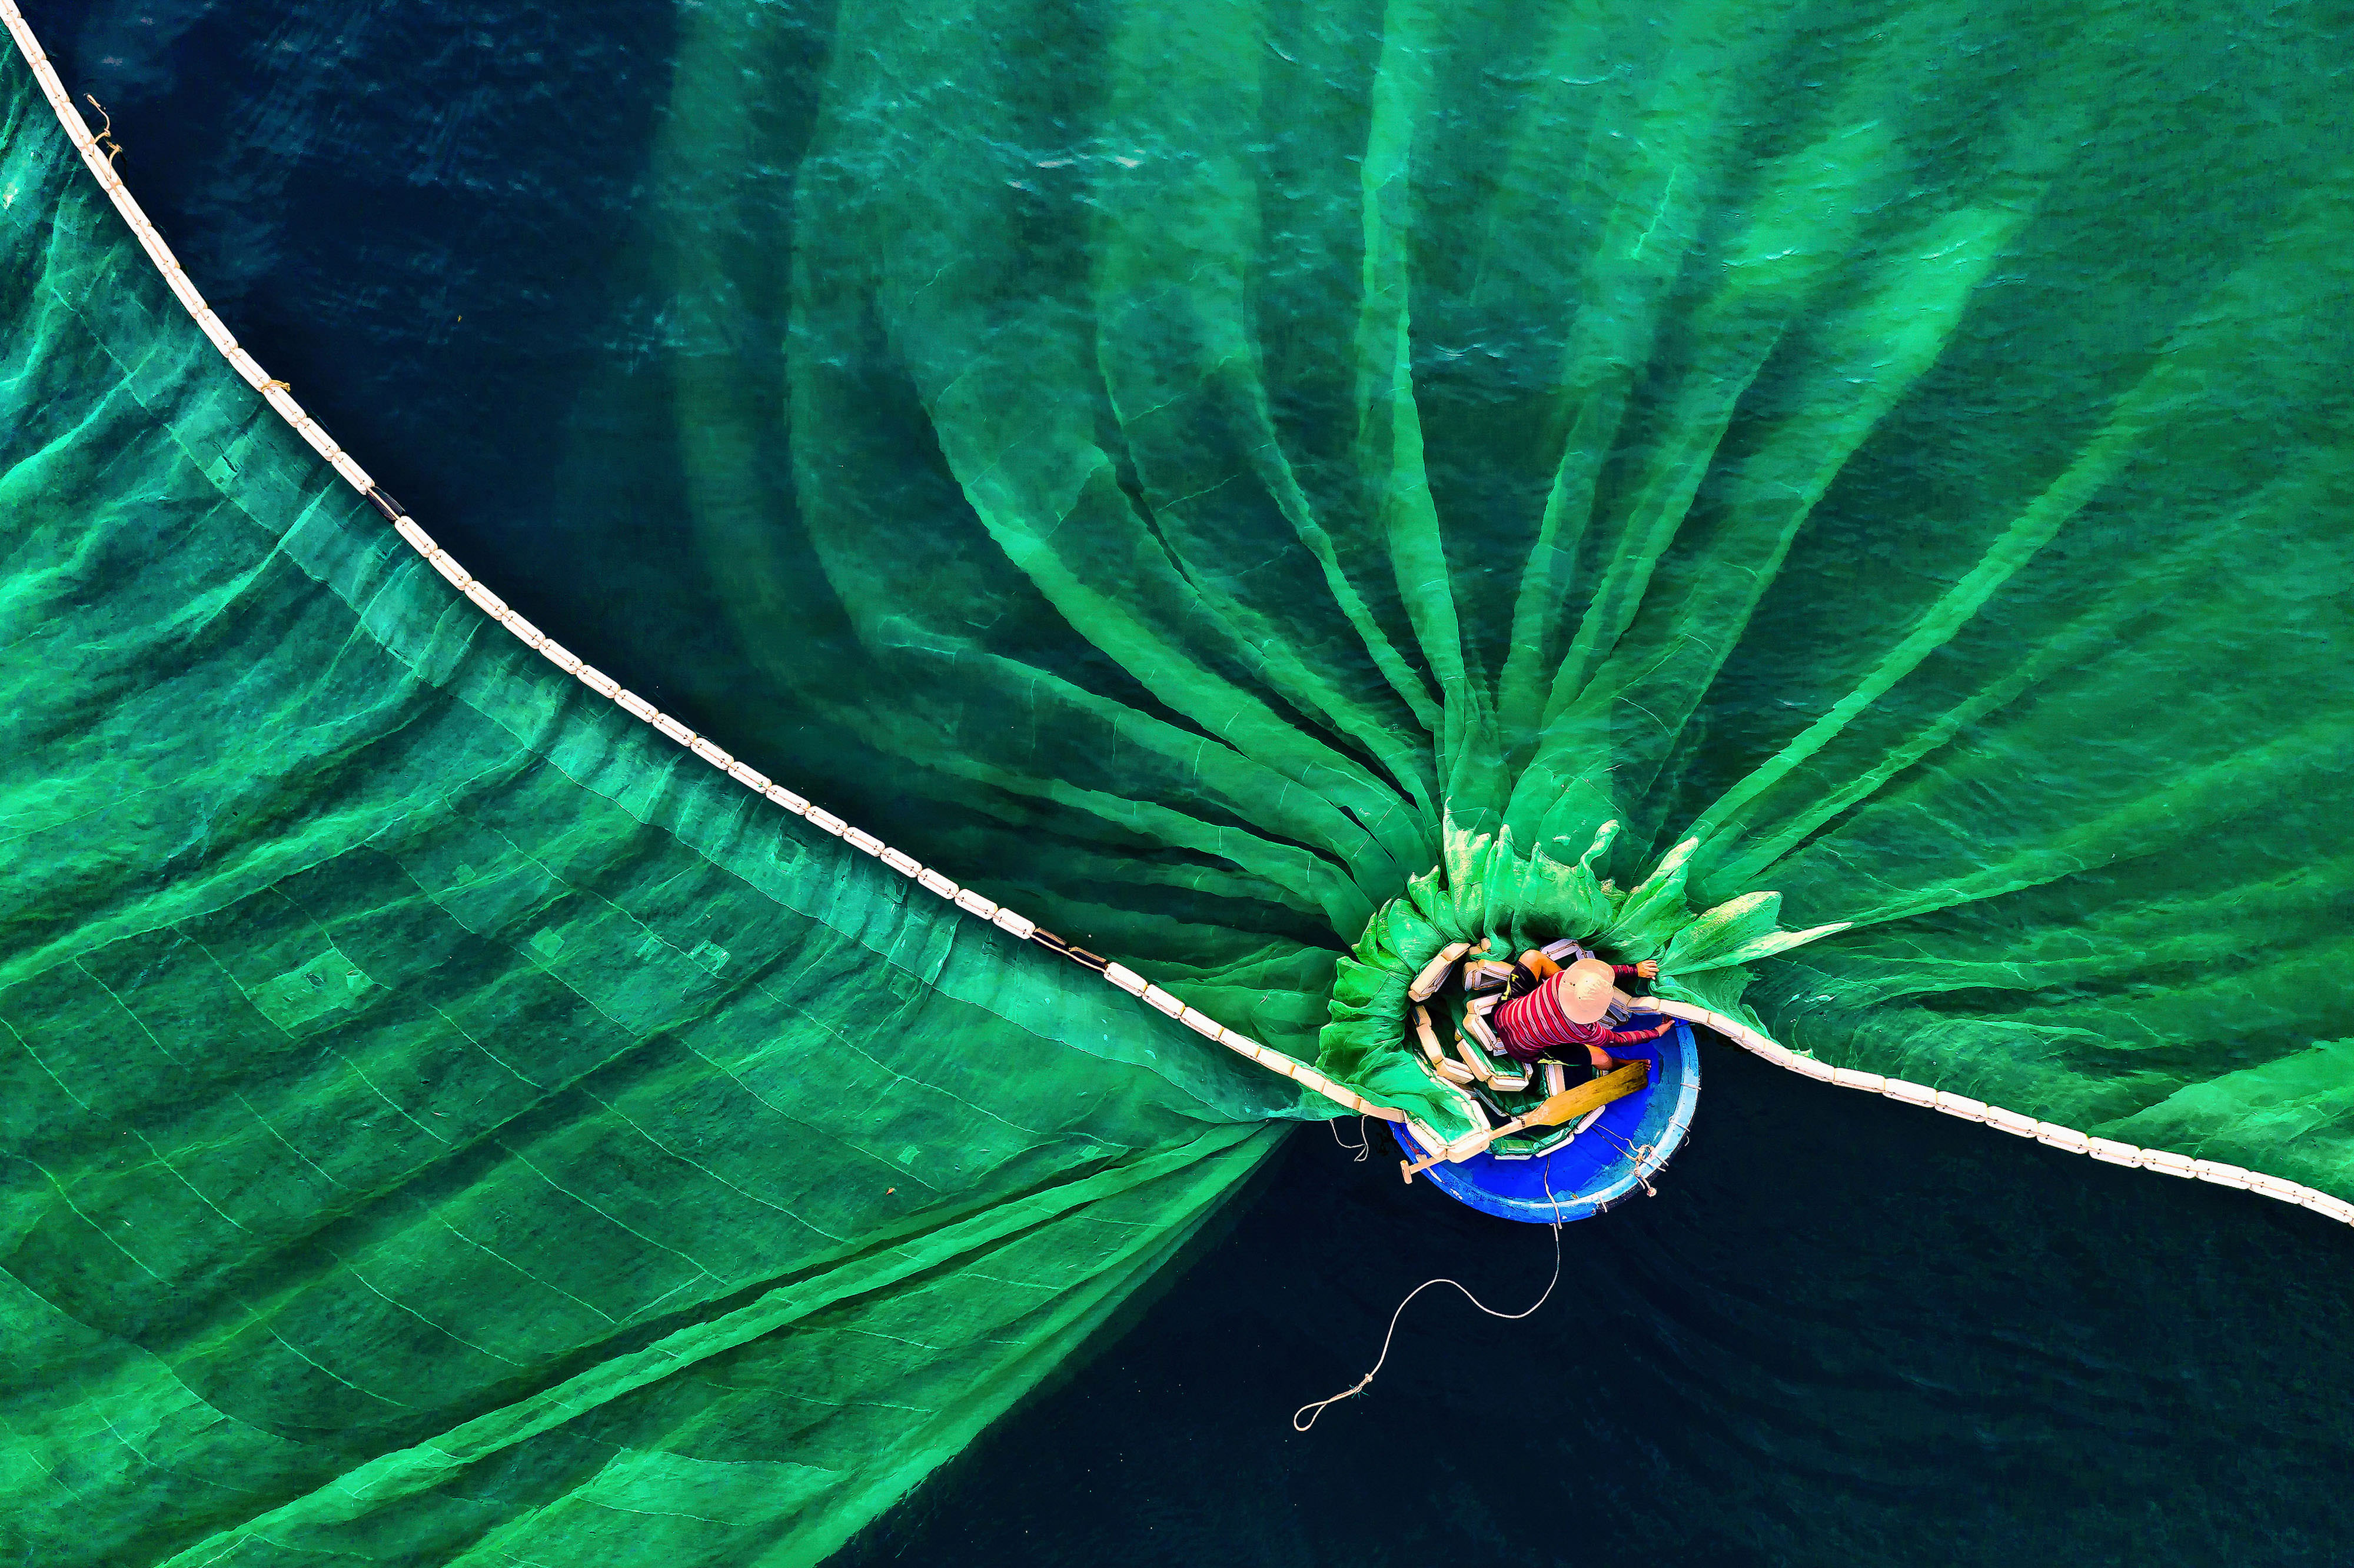 A person in a small circular boat casts a massive fishing net into the water.